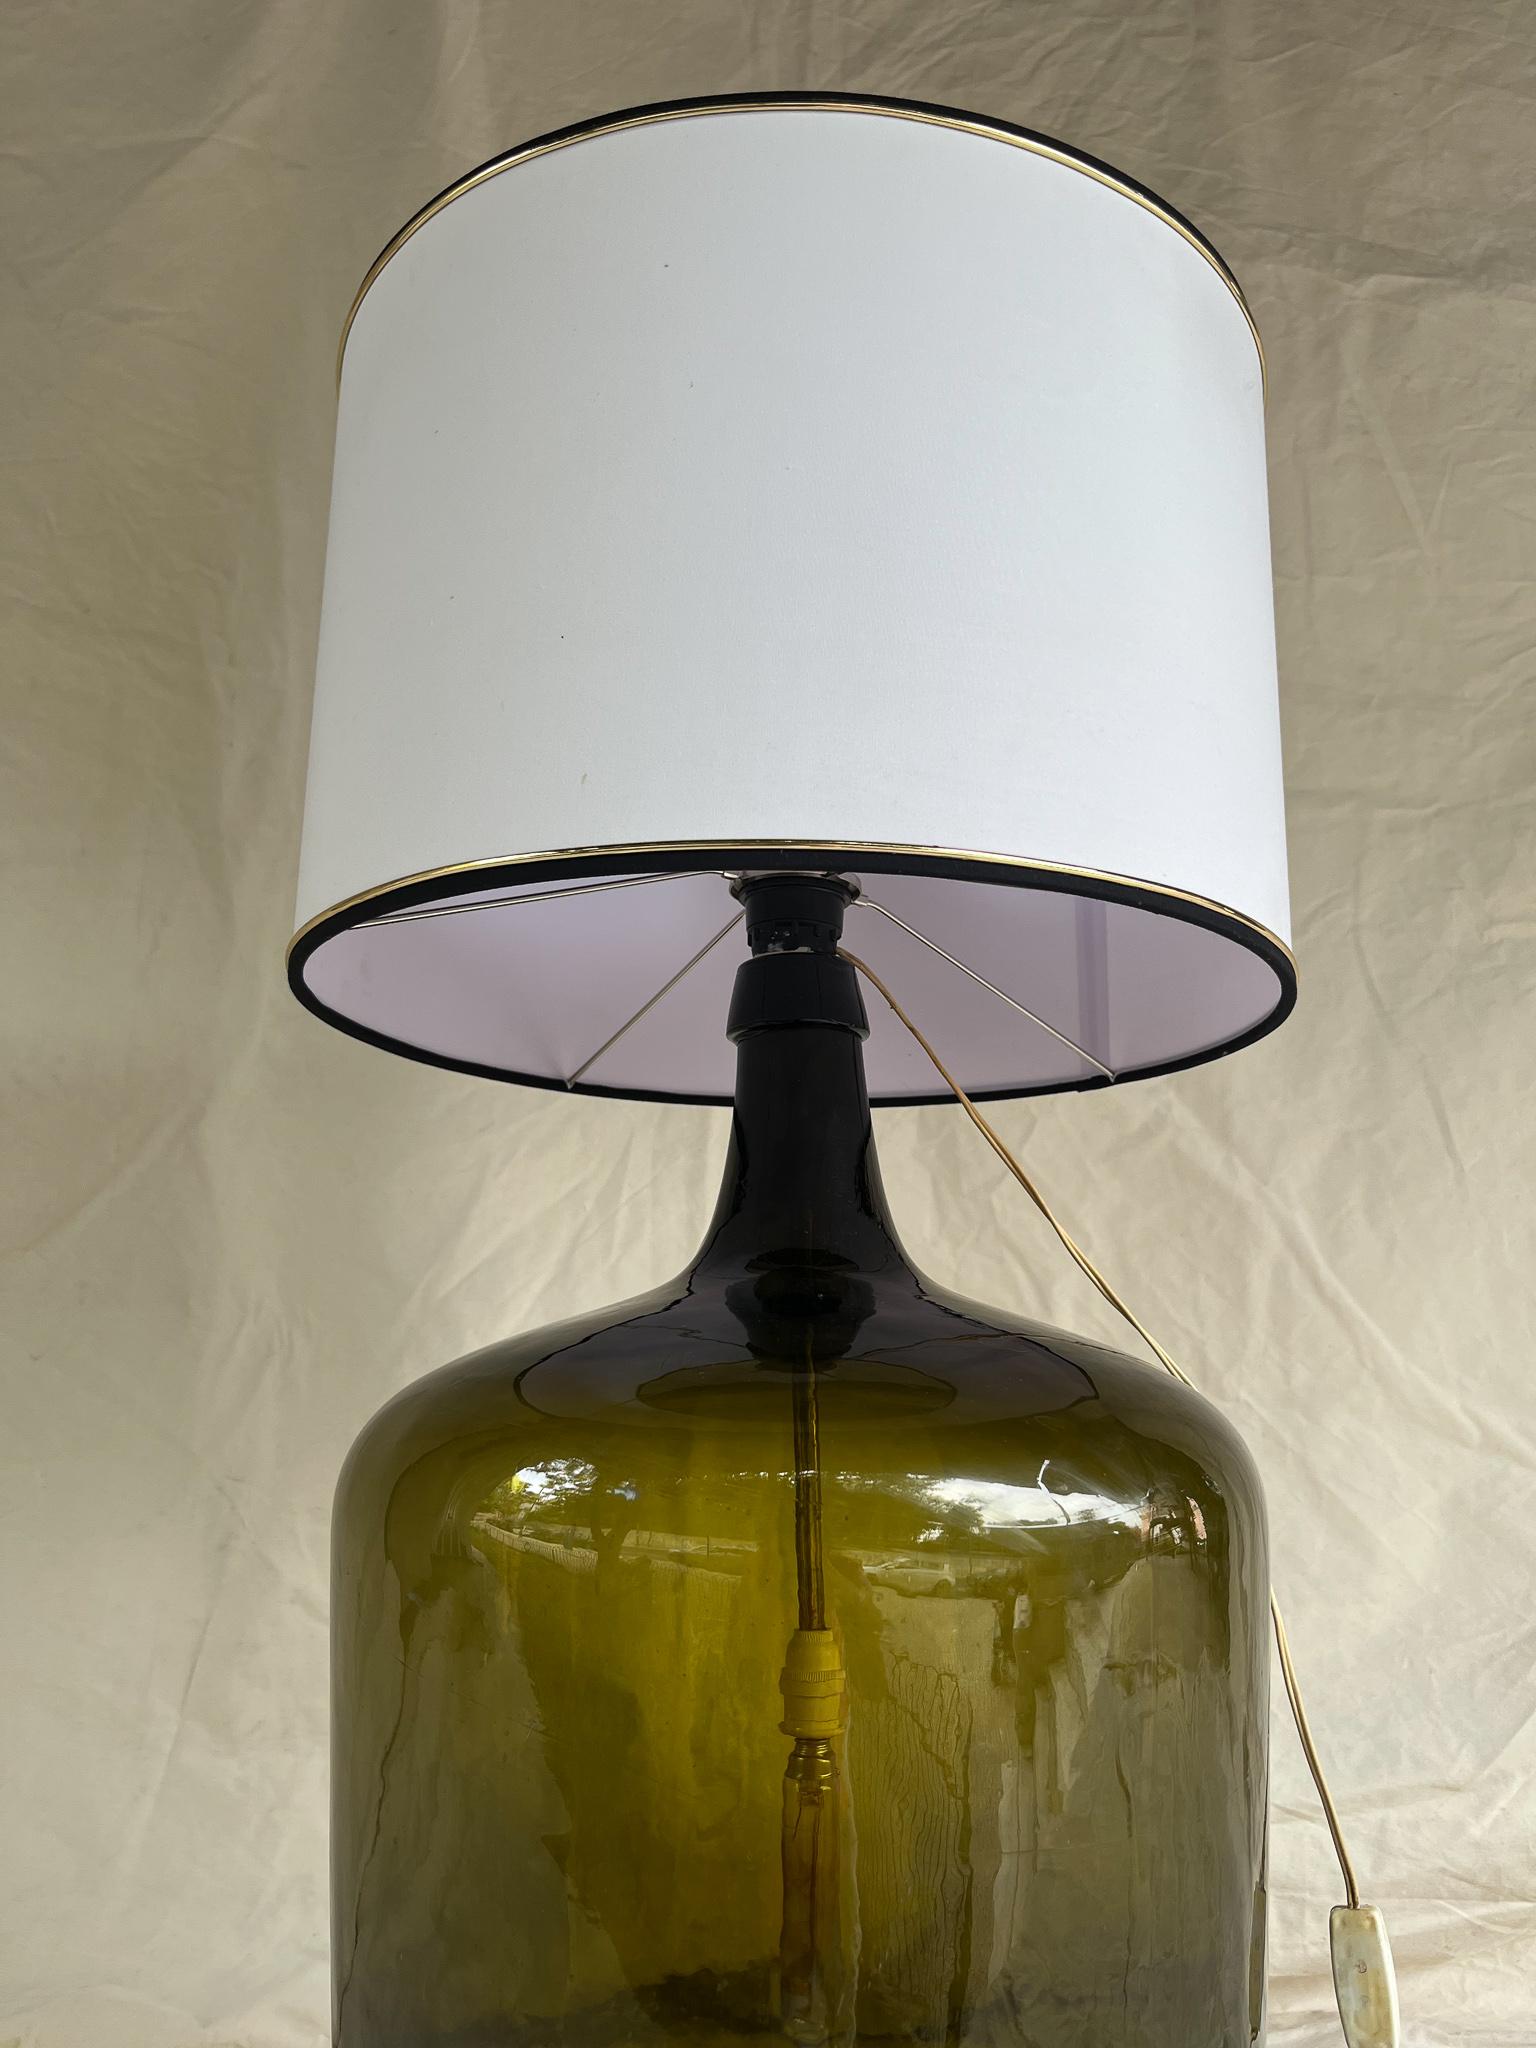 Glass barrel adapted to lamp. Portugal 20th century.